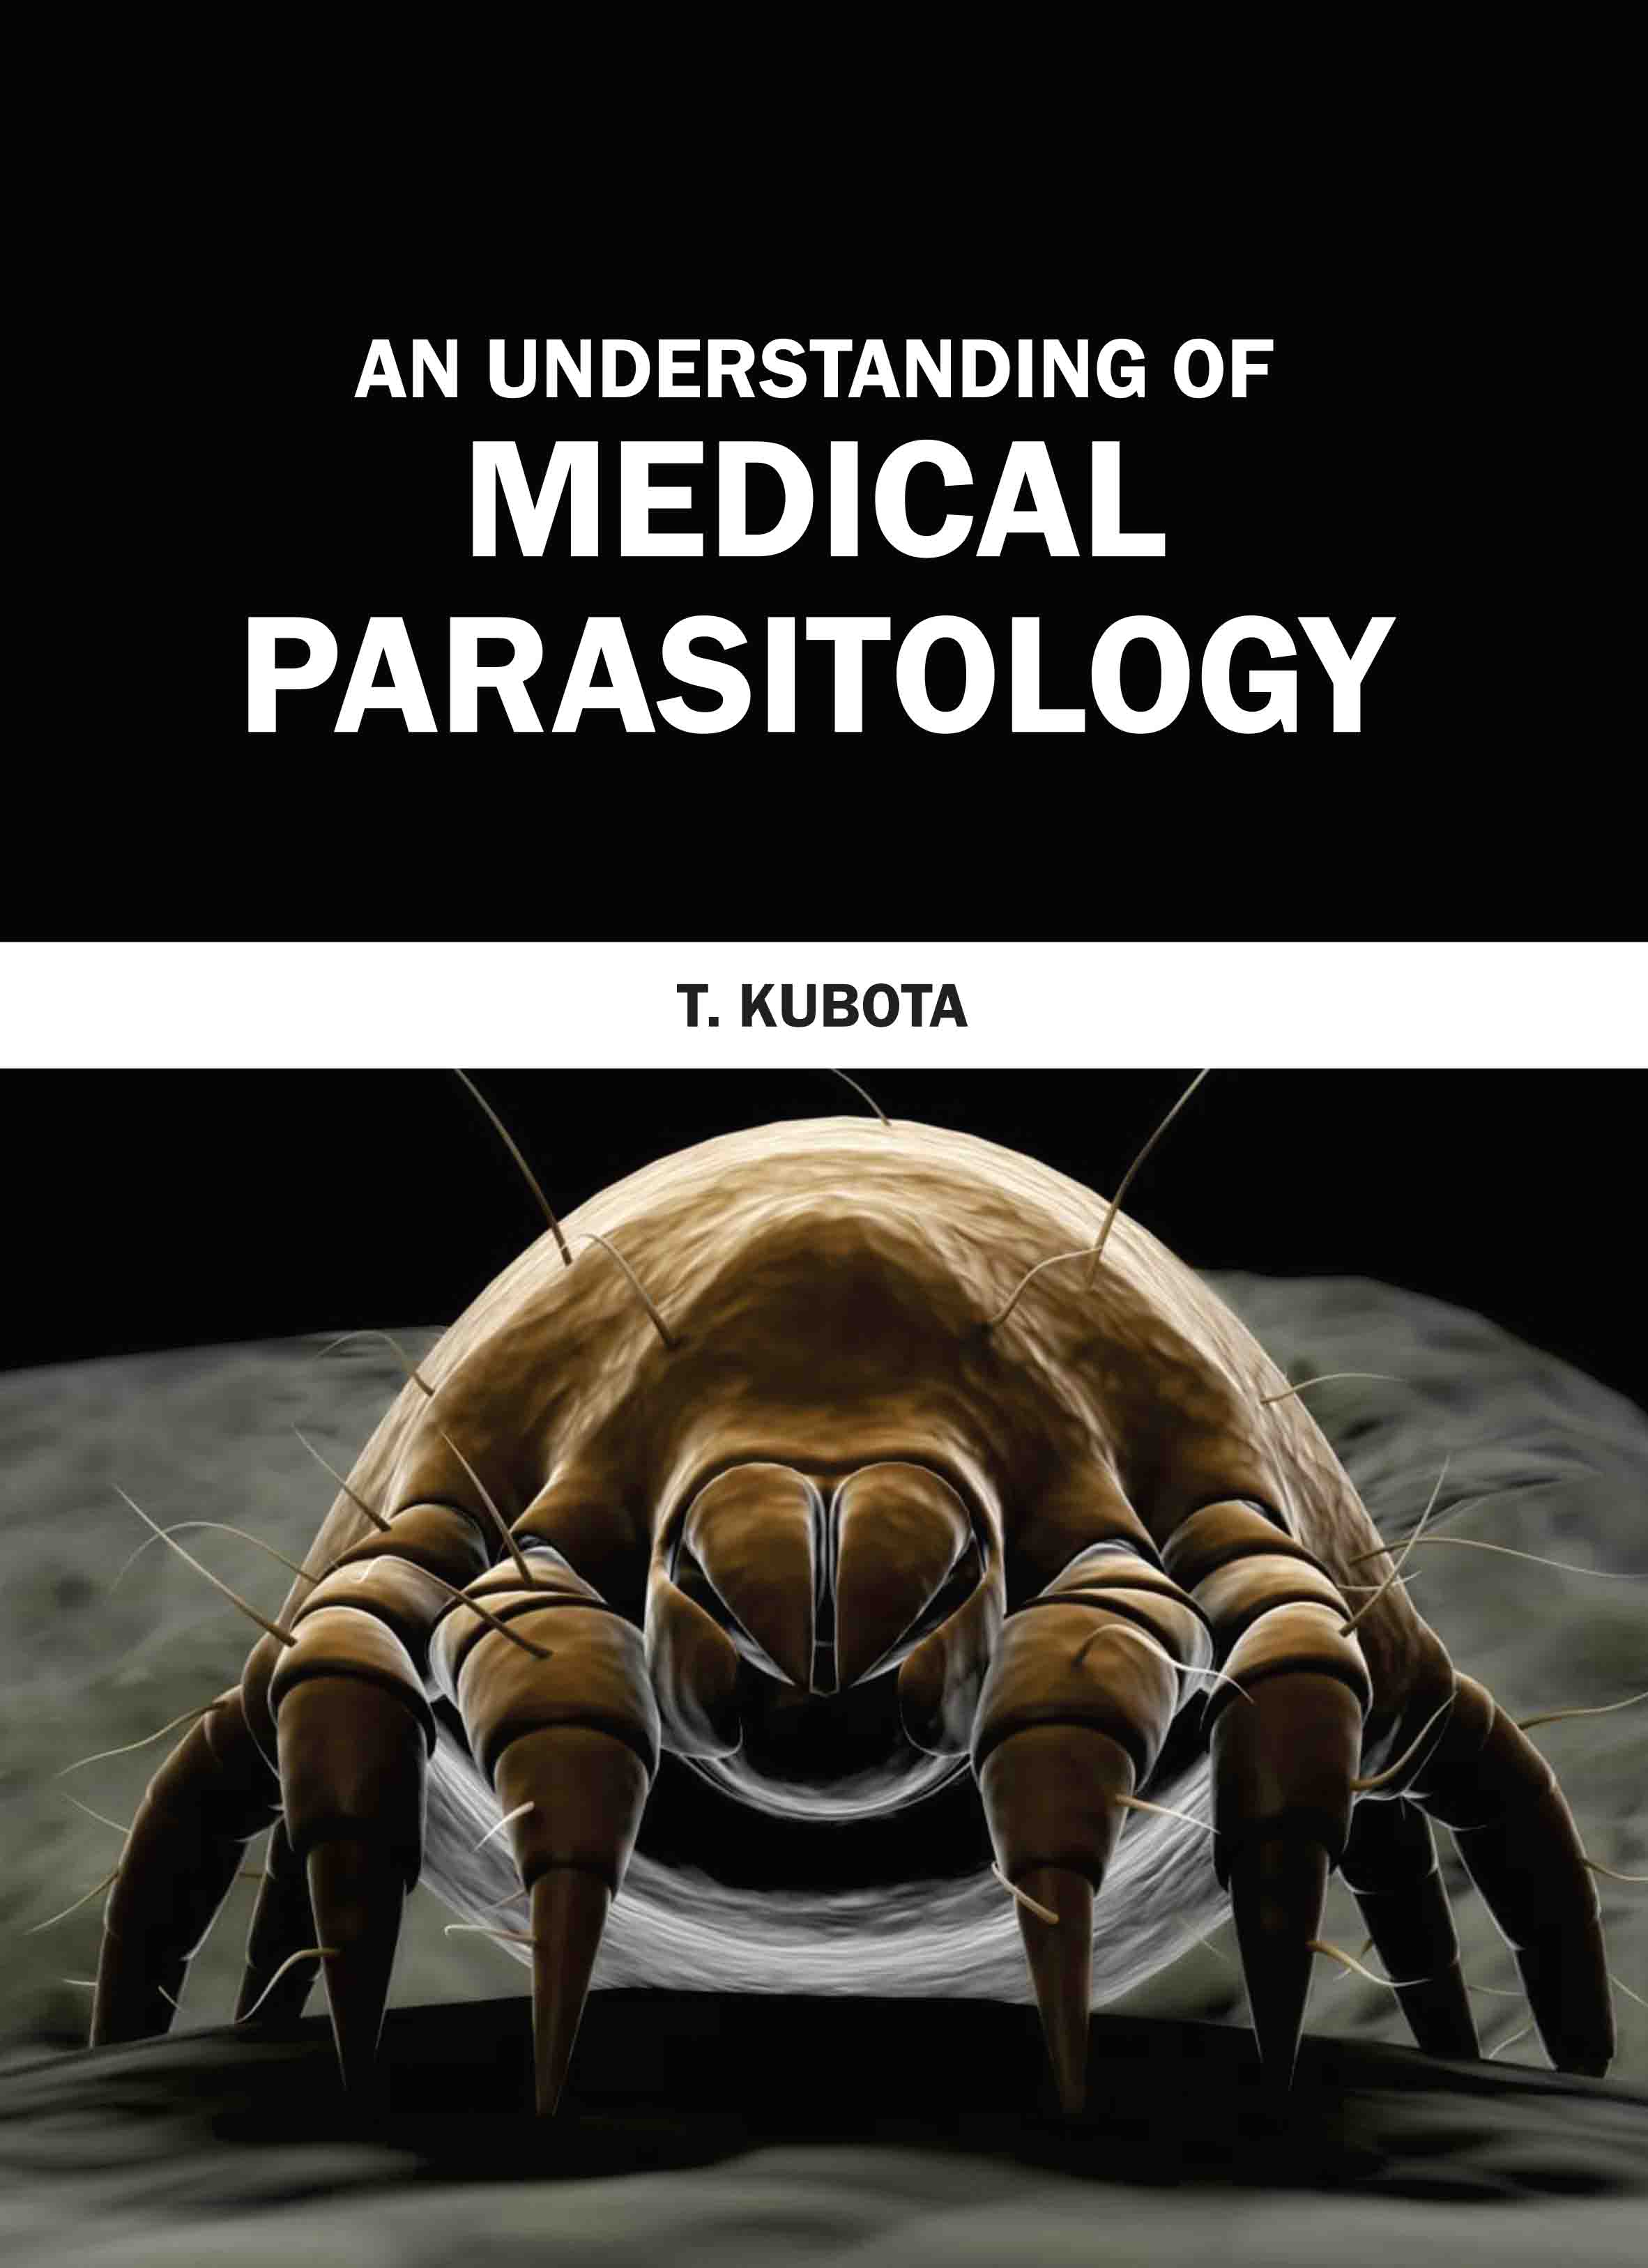 An Understanding of Medical Parasitology